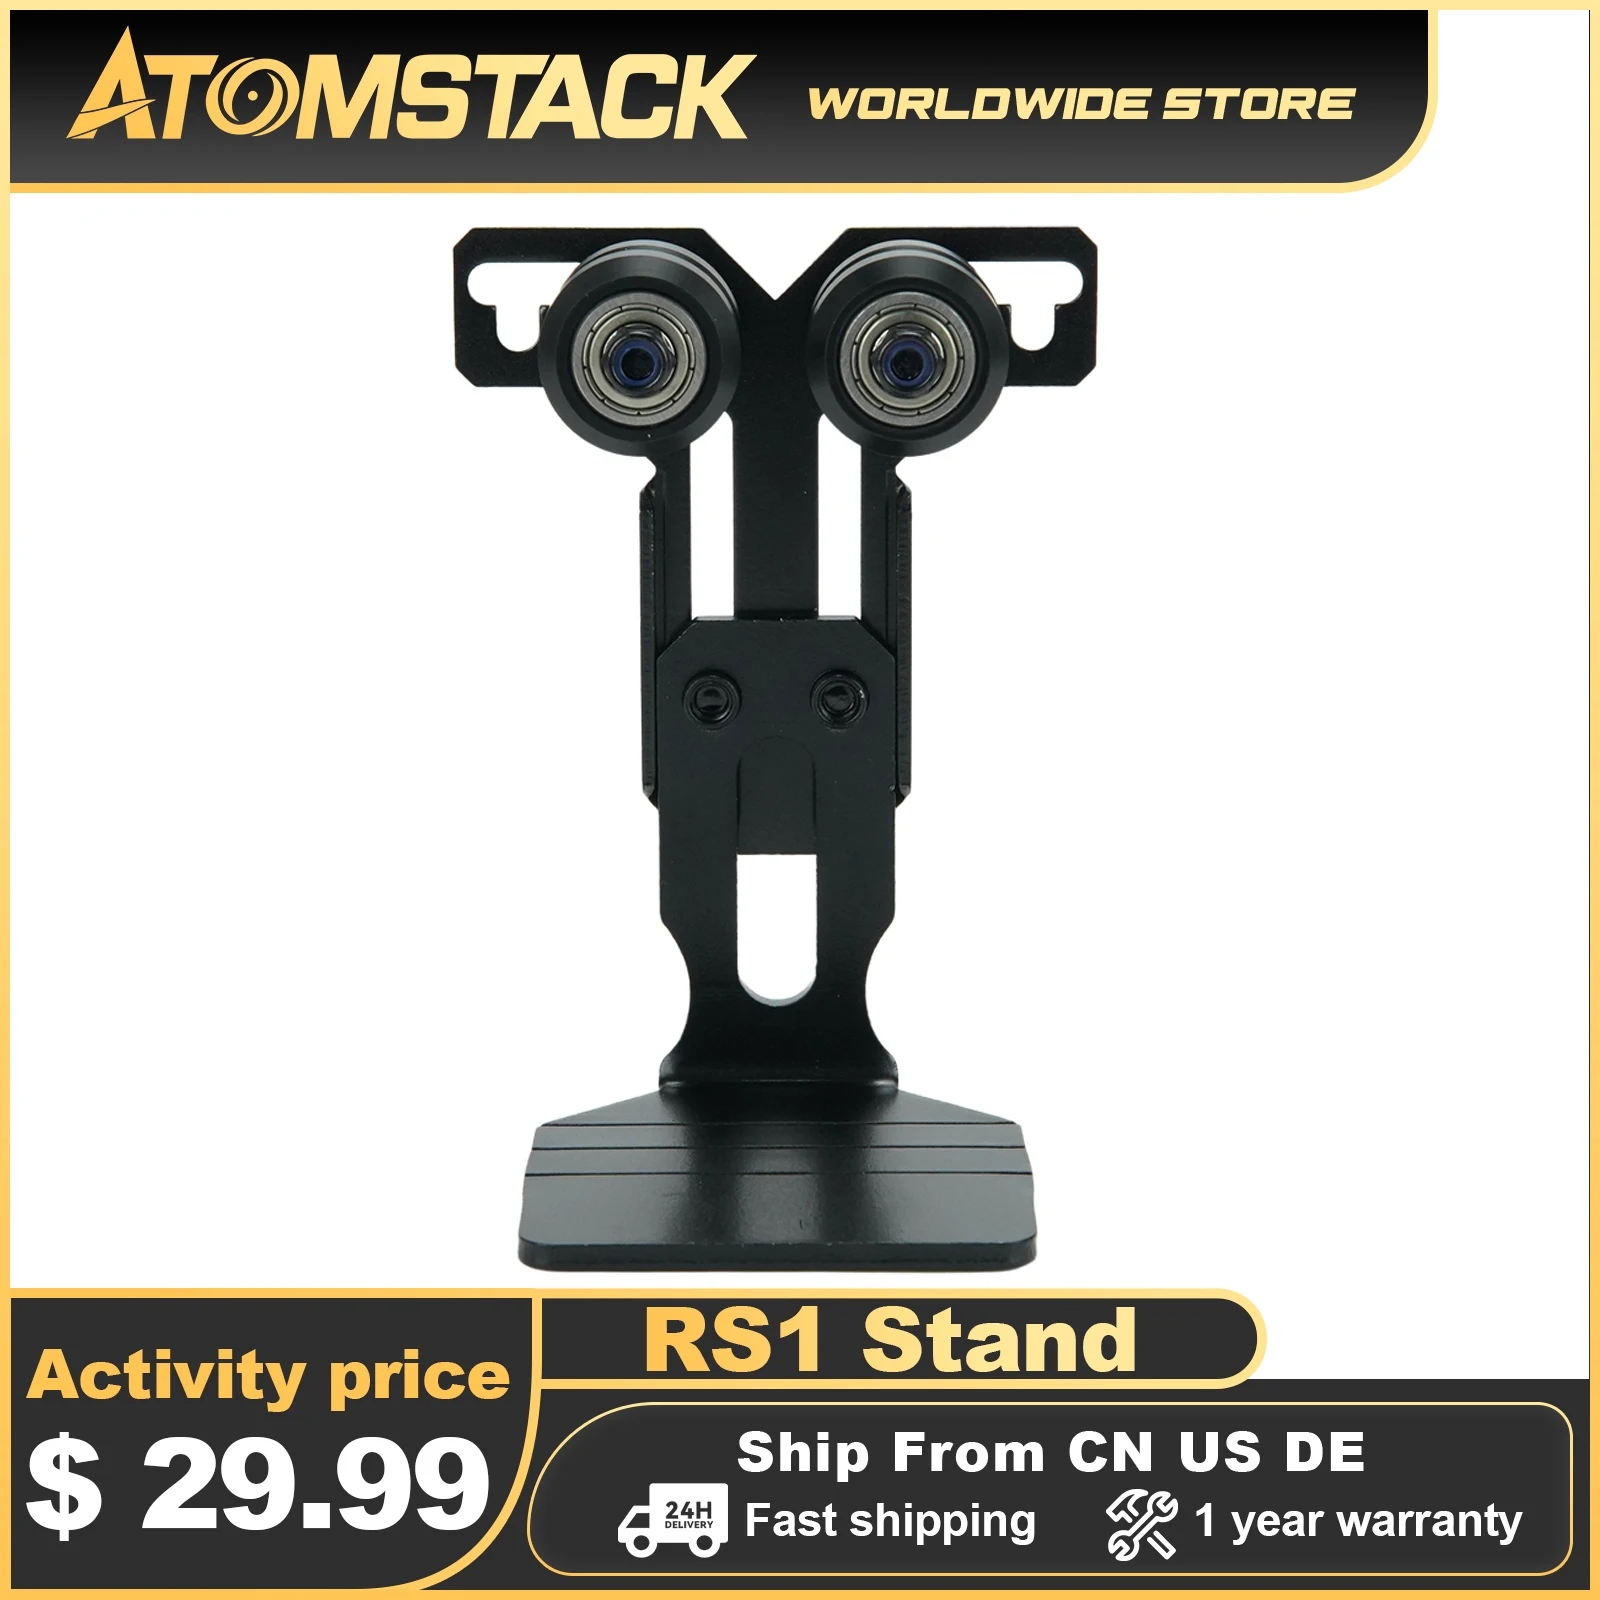 

ATOMSTACK RS1 Stand for Rotating Roller Compatible 95% Of Laser Engraver Machine Ortur Neje Twotress Roller Steady Support Based